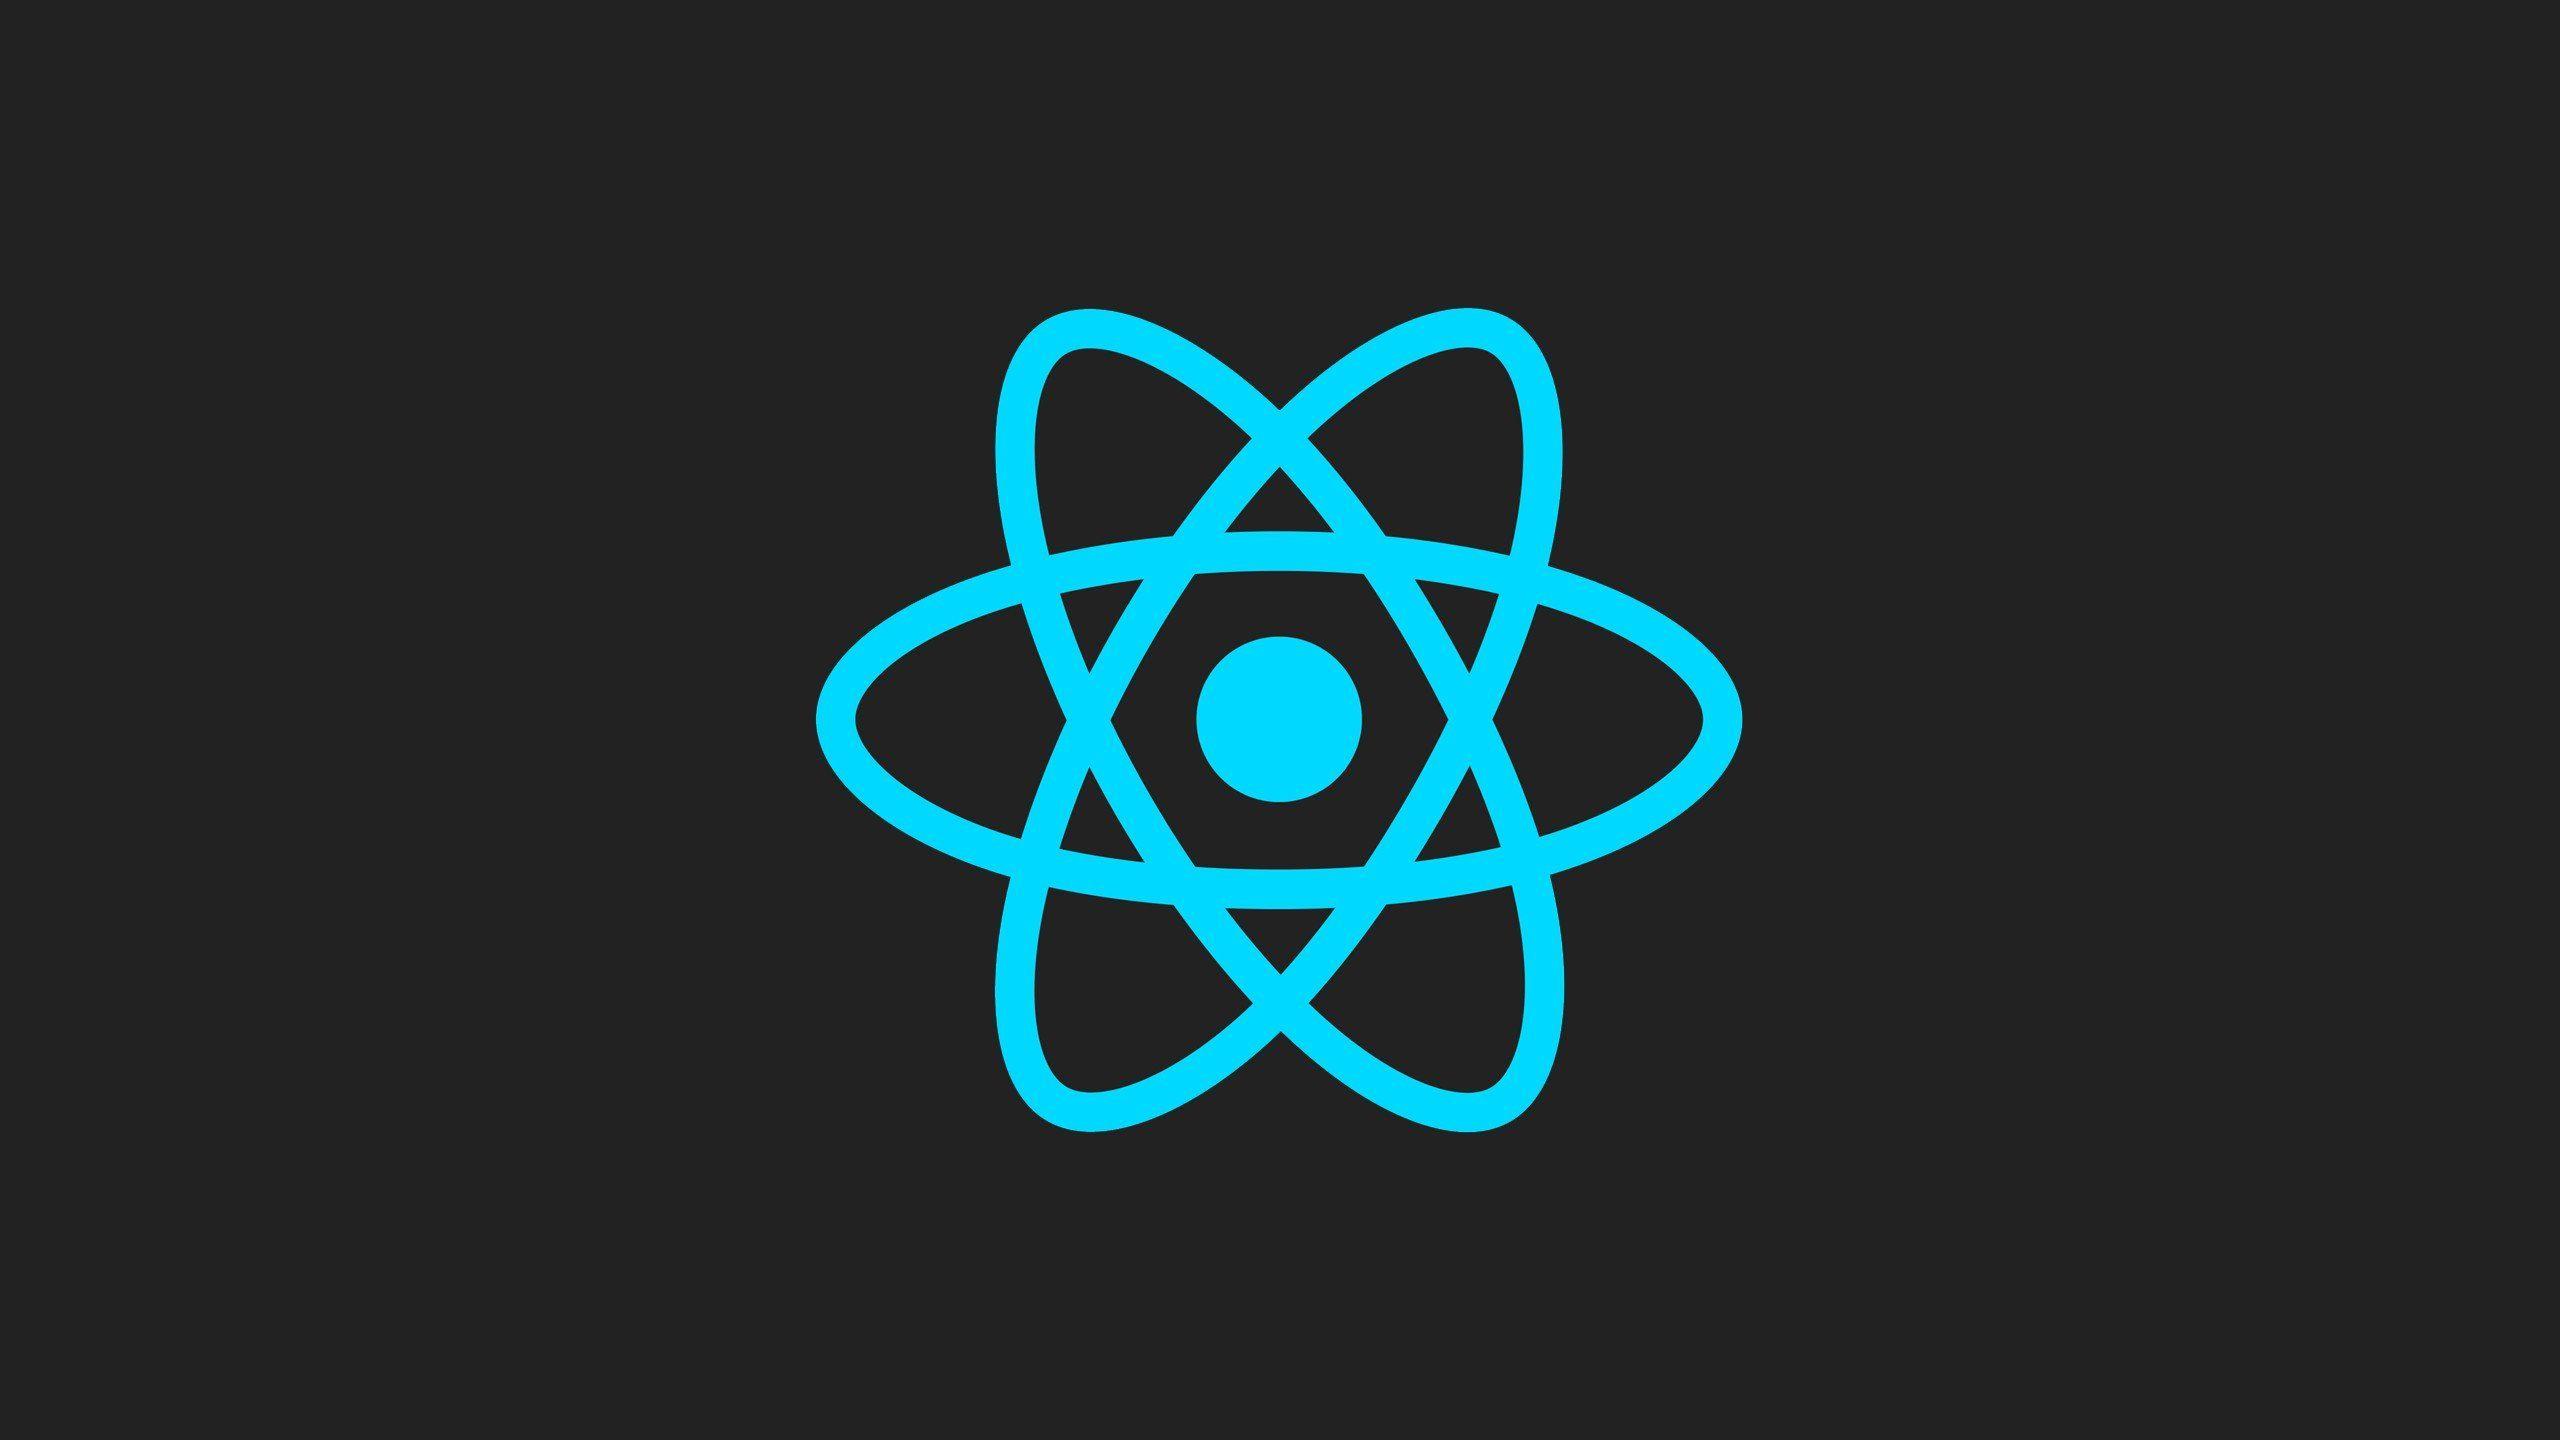 Why you should use React.js for web development?